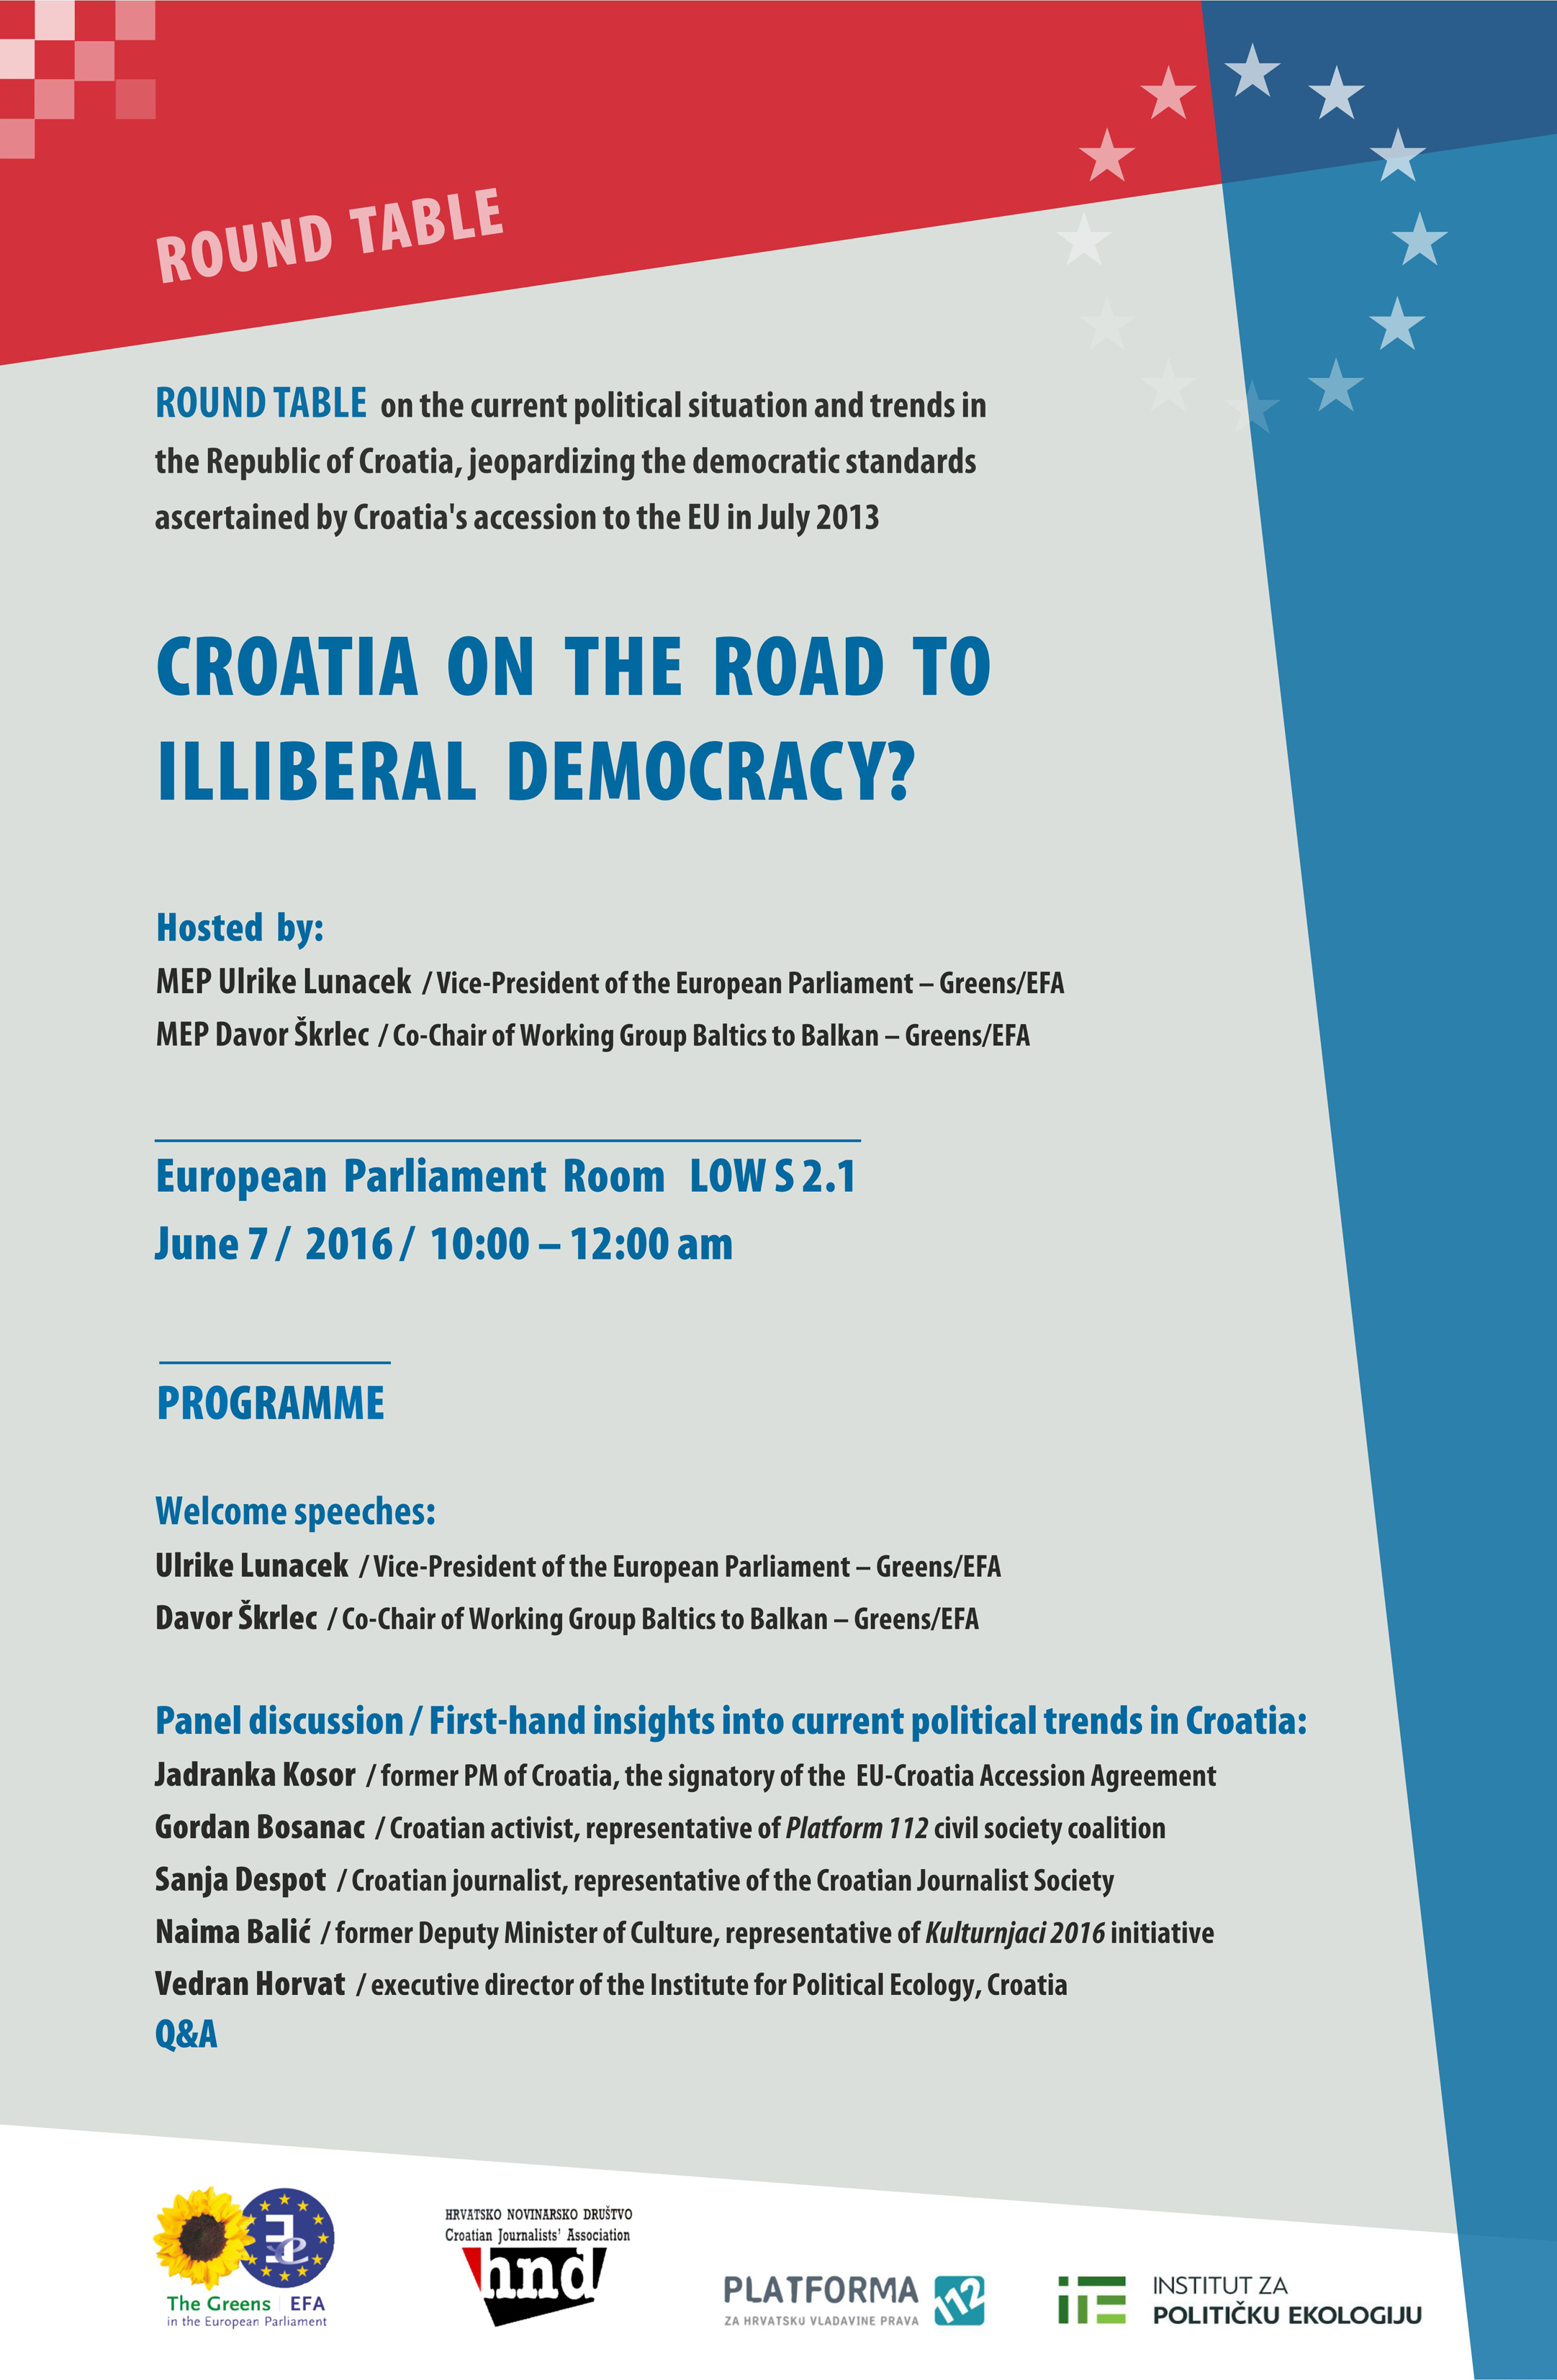 Round Table_Croatia on the Road to Illiberal Democracy